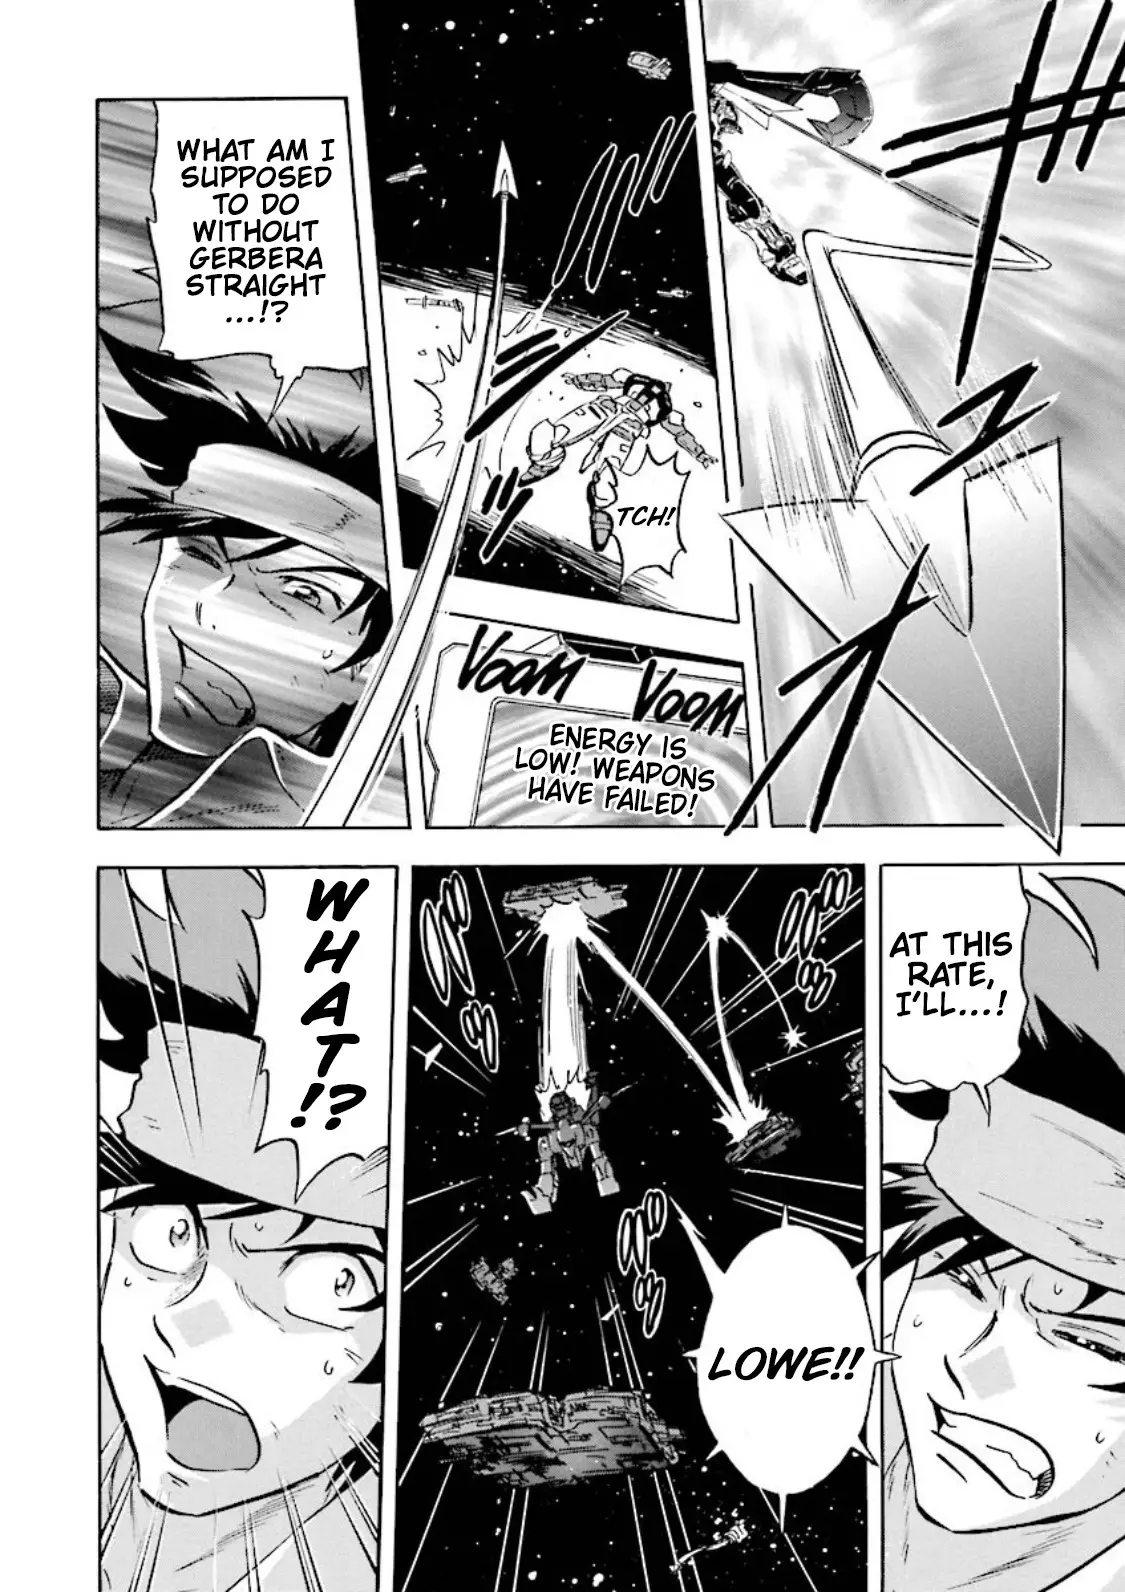 Mobile Suit Gundam Seed Astray Re:master Edition - 15 page 21-7614063d